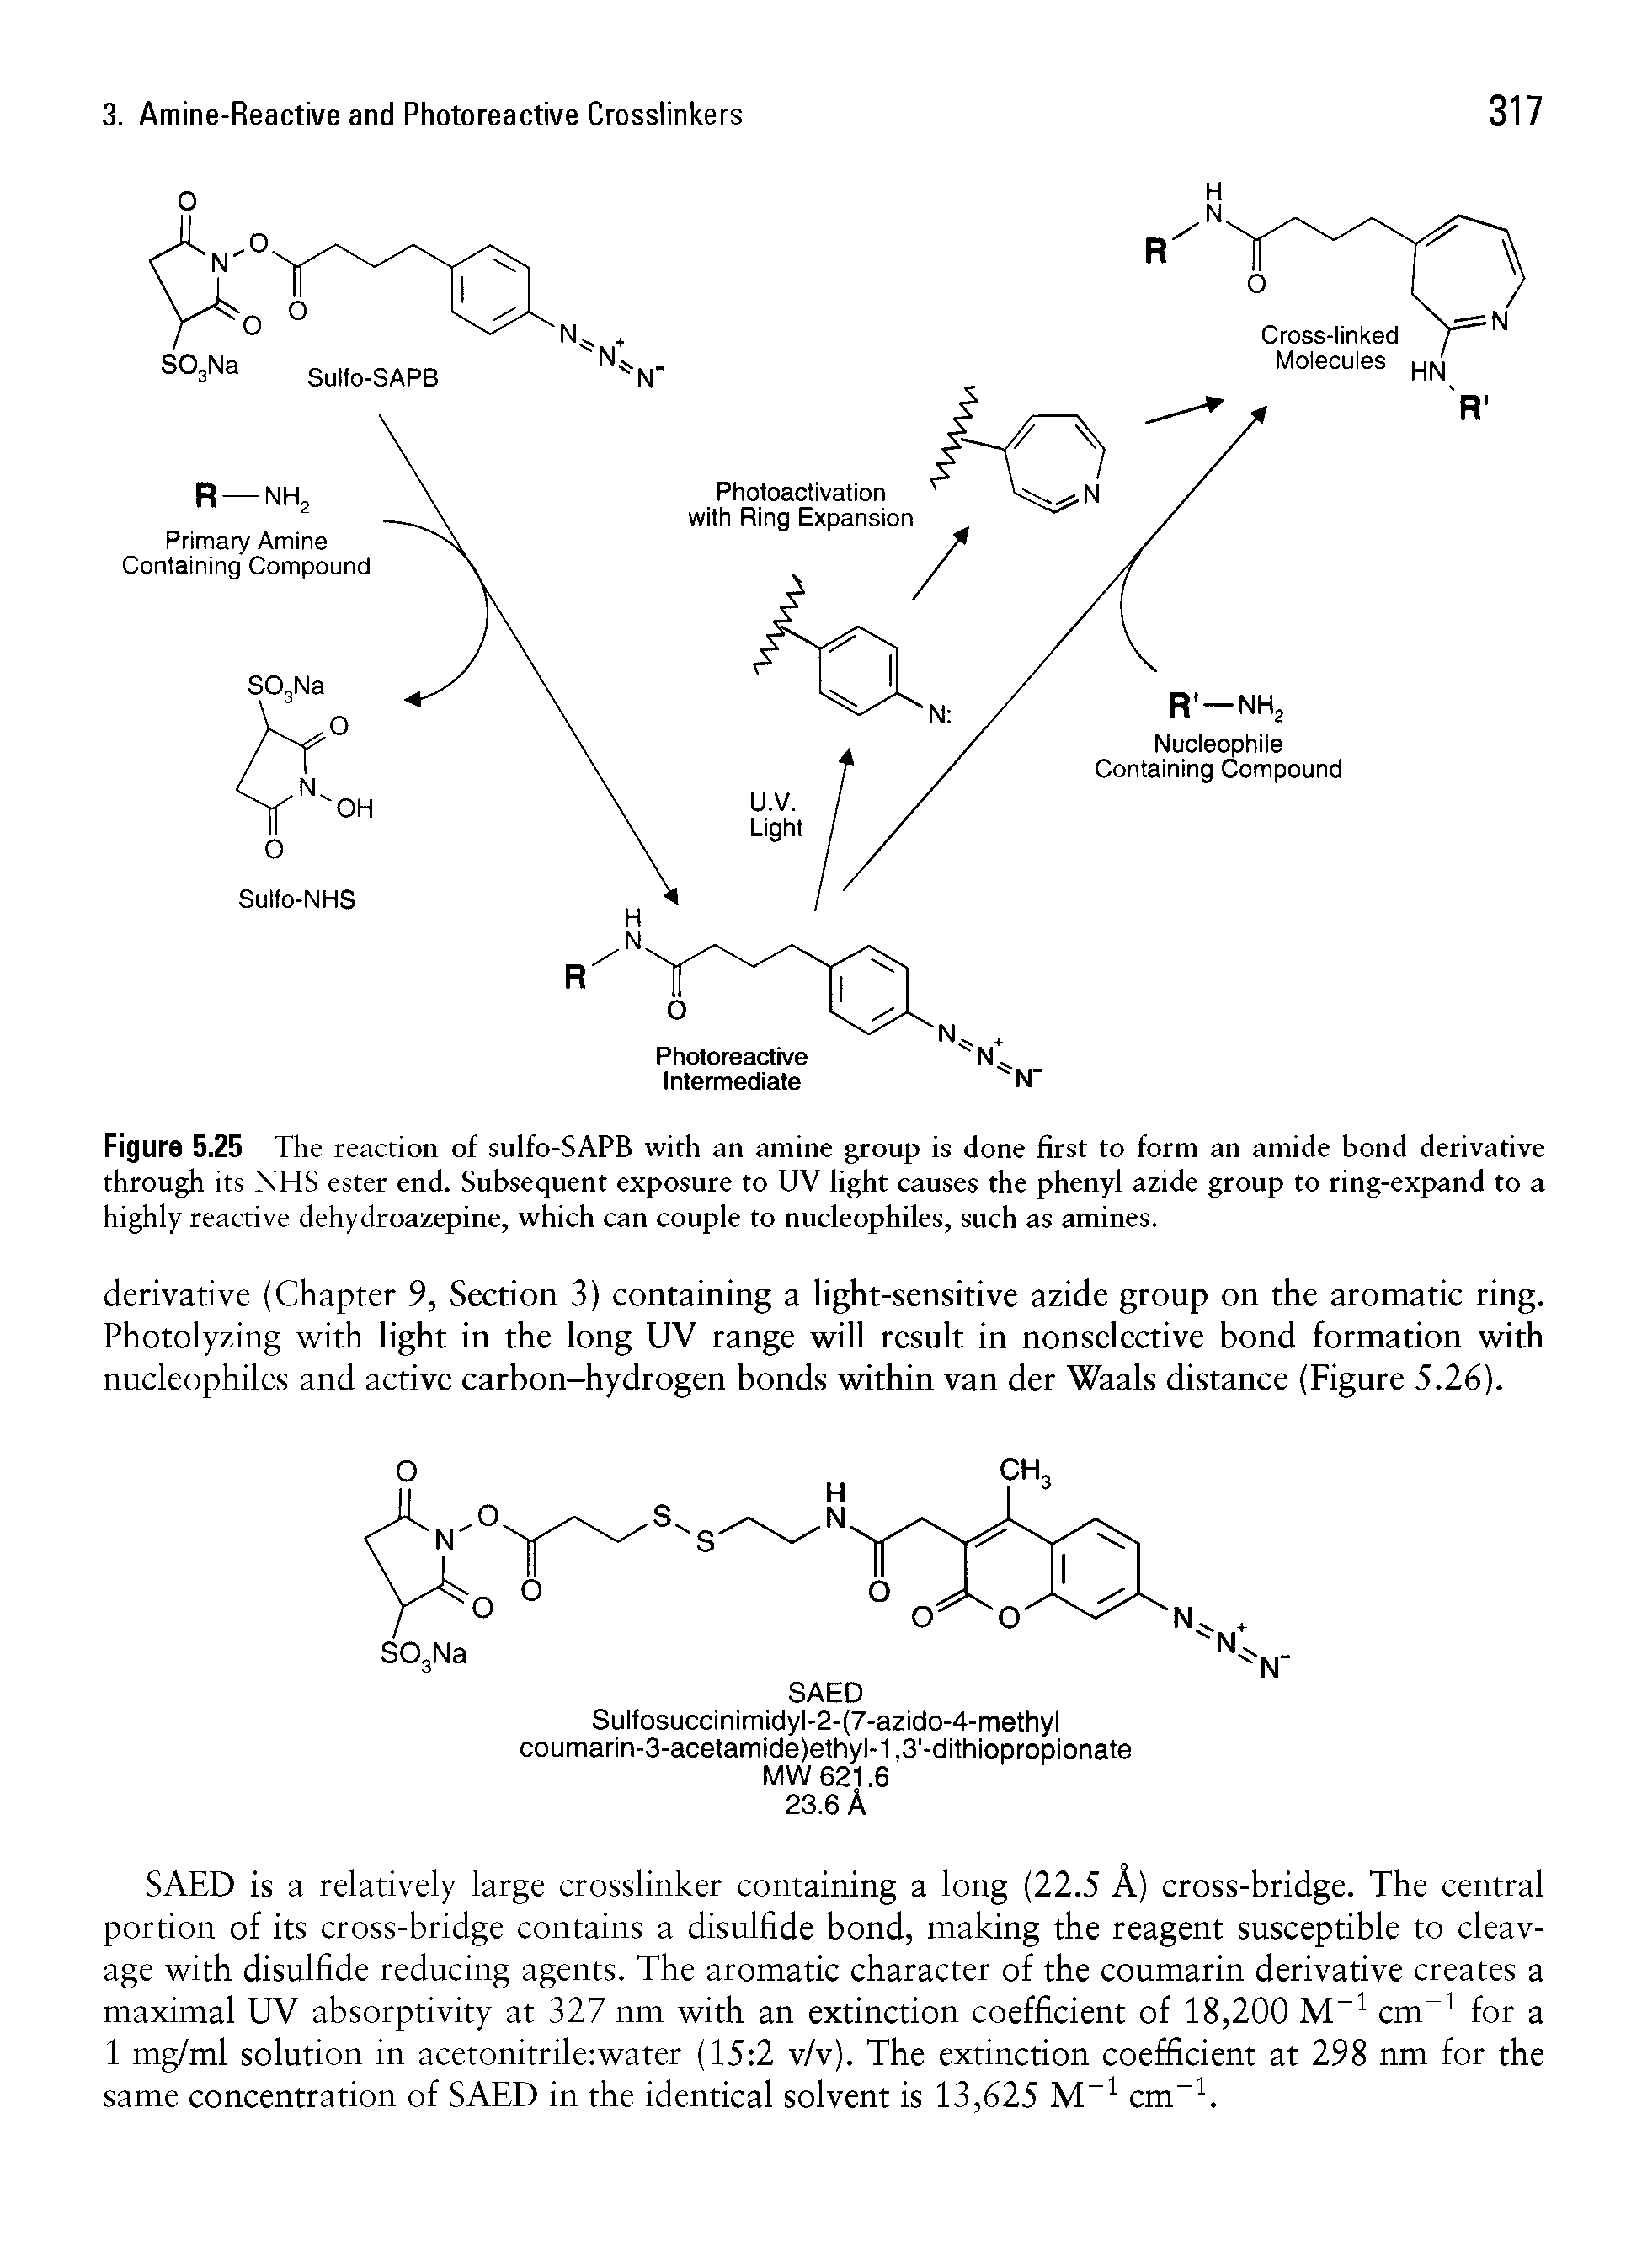 Figure 5.25 The reaction of sulfo-SAPB with an amine group is done first to form an amide bond derivative through its NHS ester end. Subsequent exposure to UV light causes the phenyl azide group to ring-expand to a highly reactive dehydroazepine, which can couple to nucleophiles, such as amines.